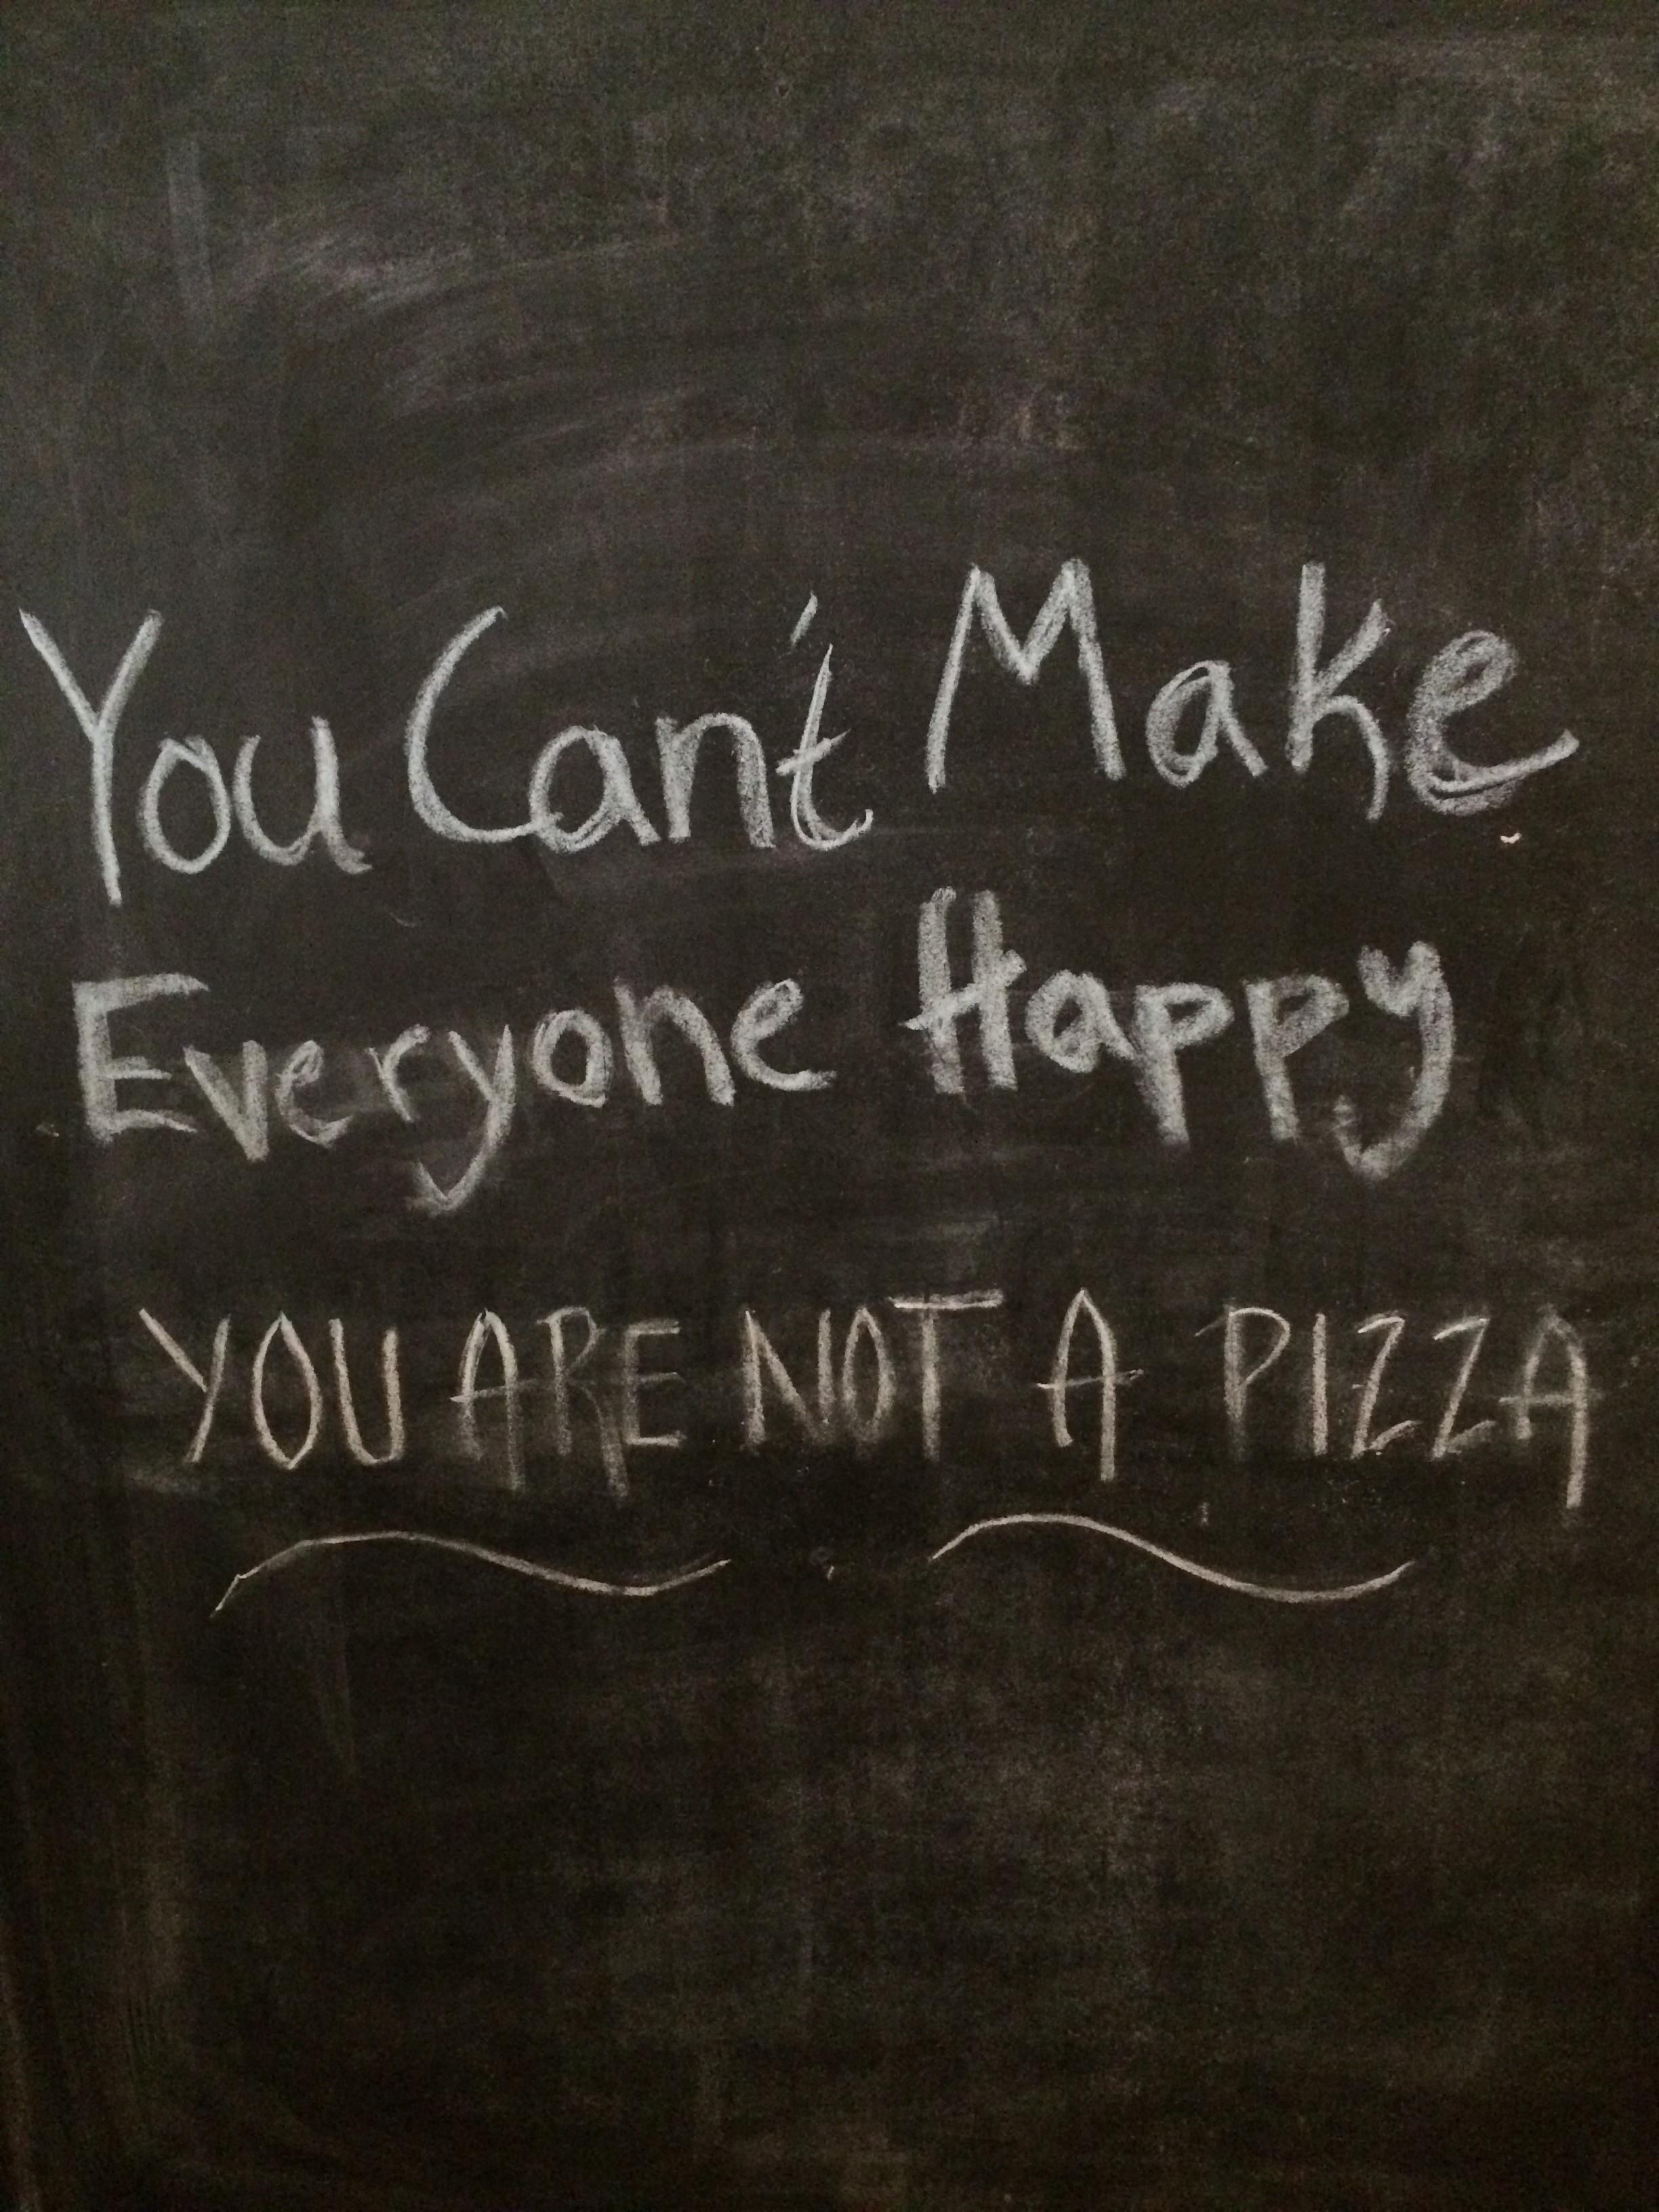 A sign at a local pizza place